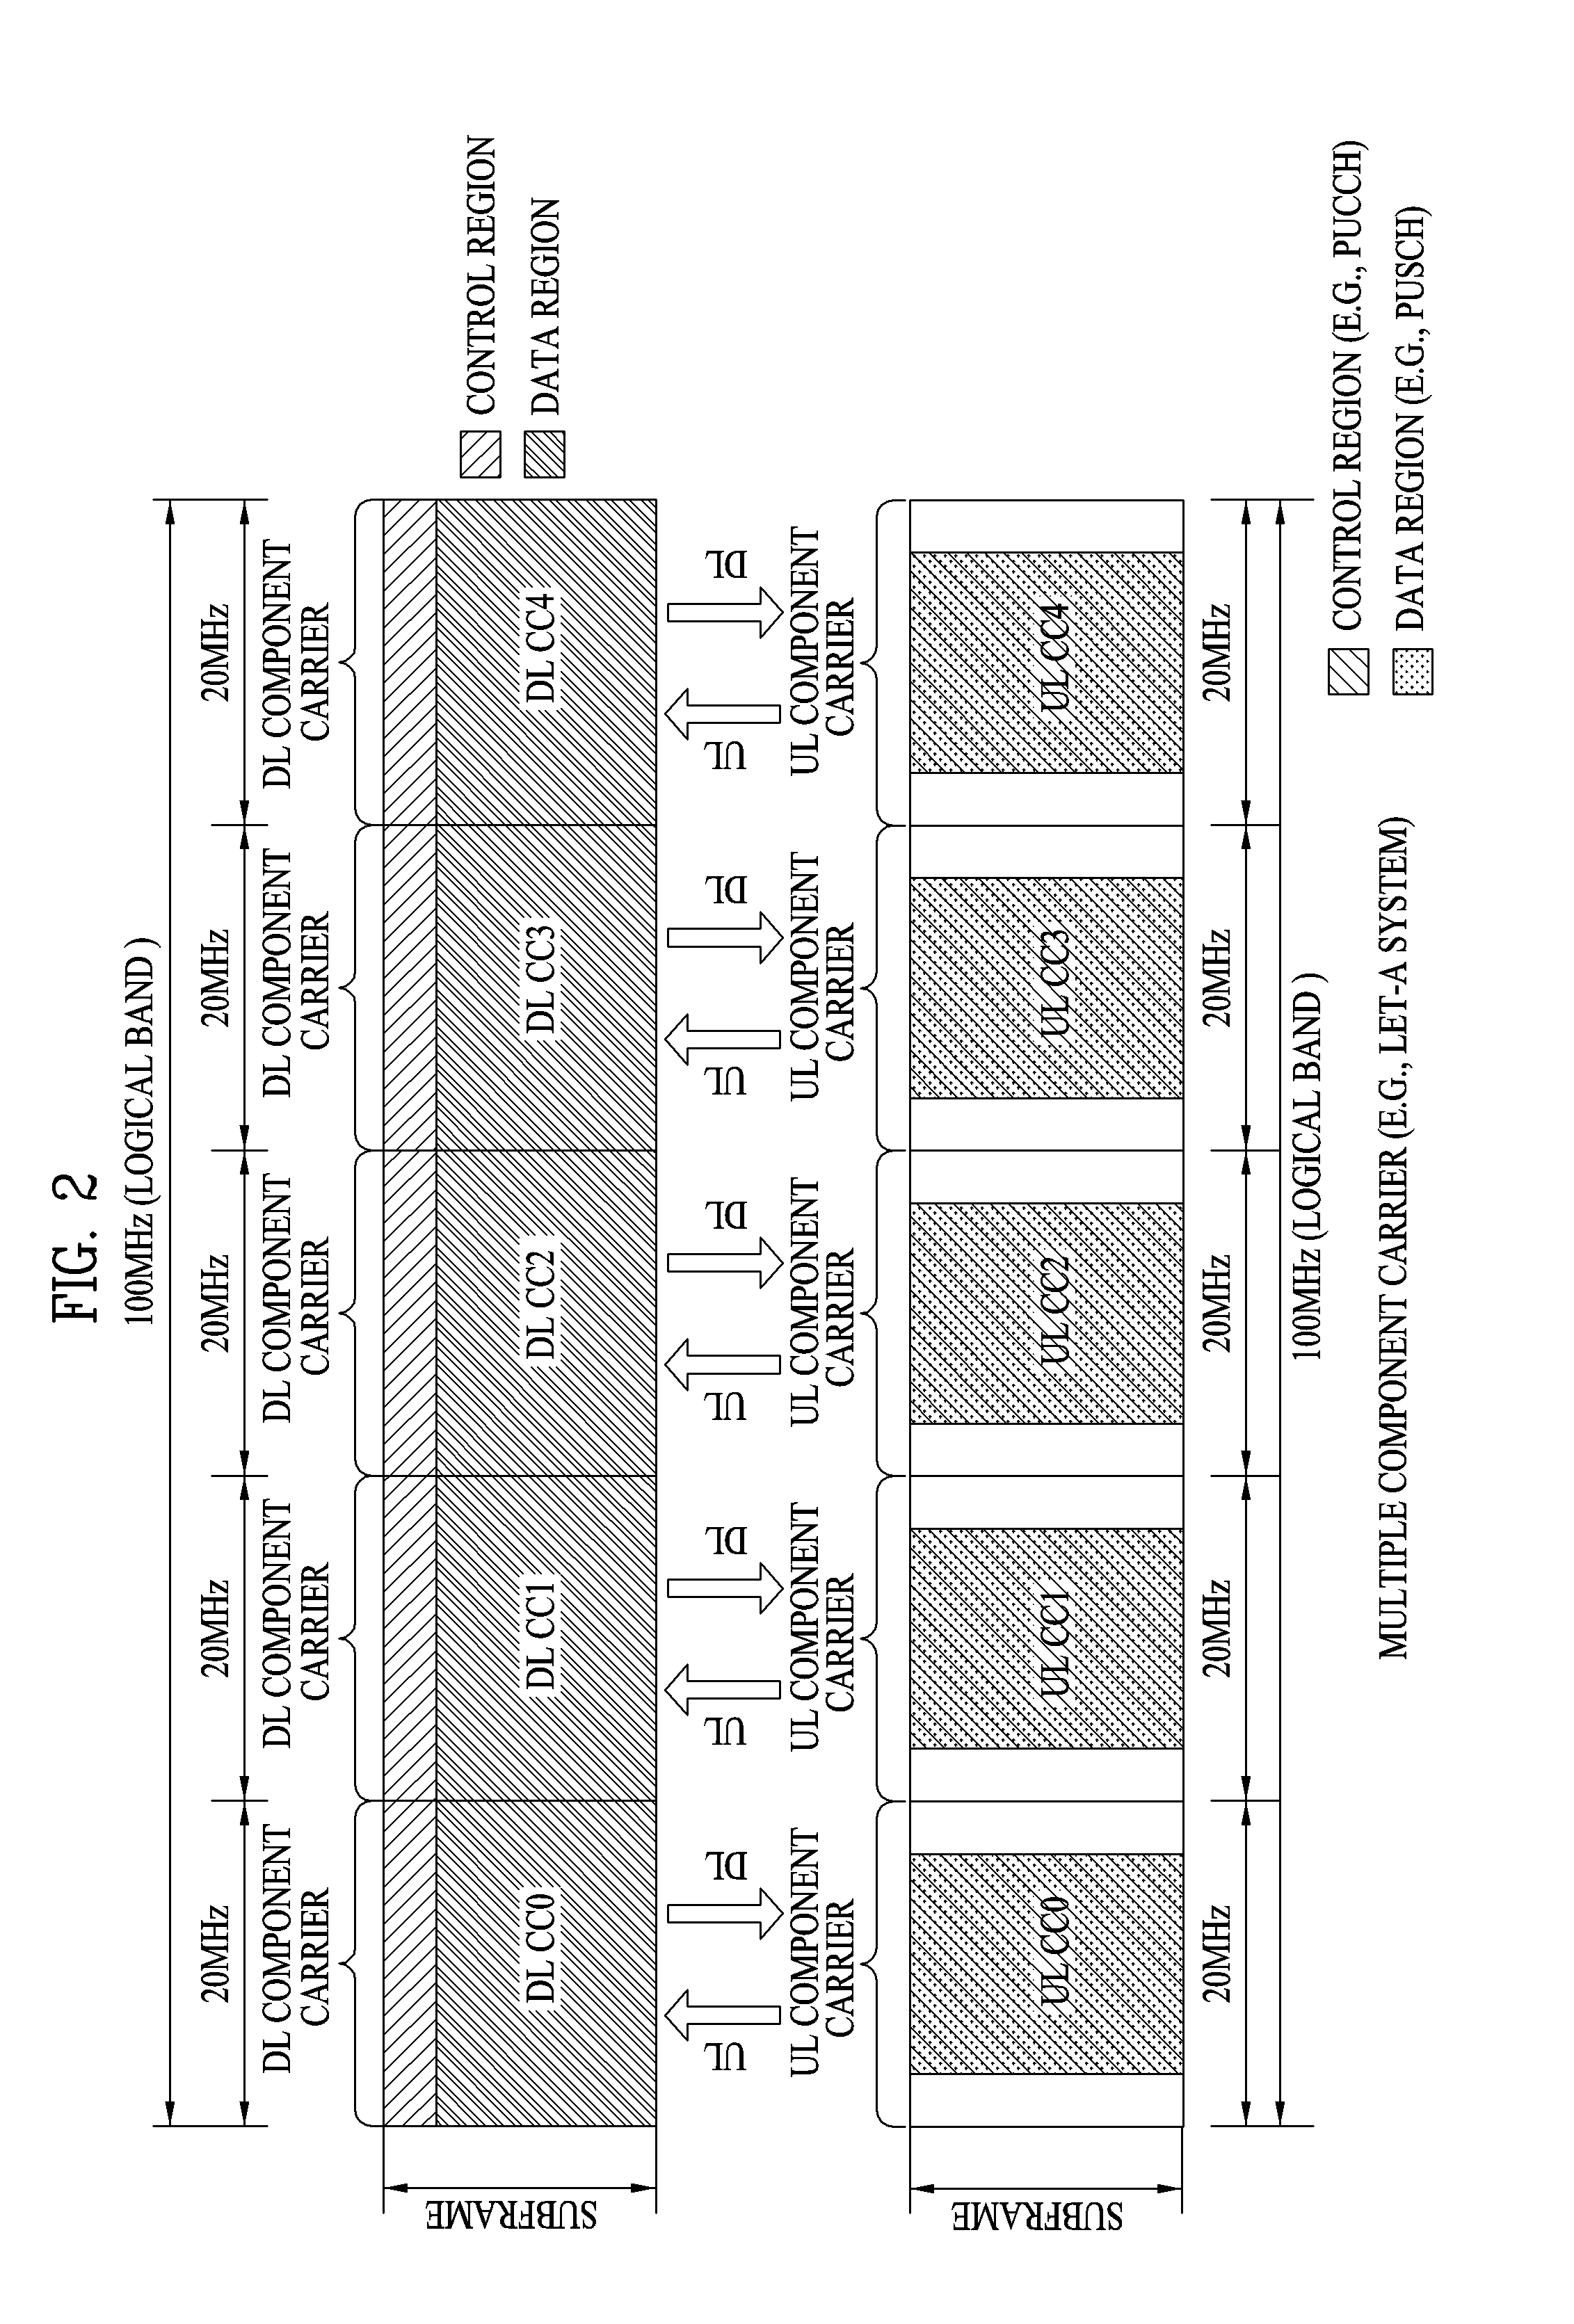 Method for transmitting downlink signal of user equipment having dual connectivity in heterogeneous cell environment